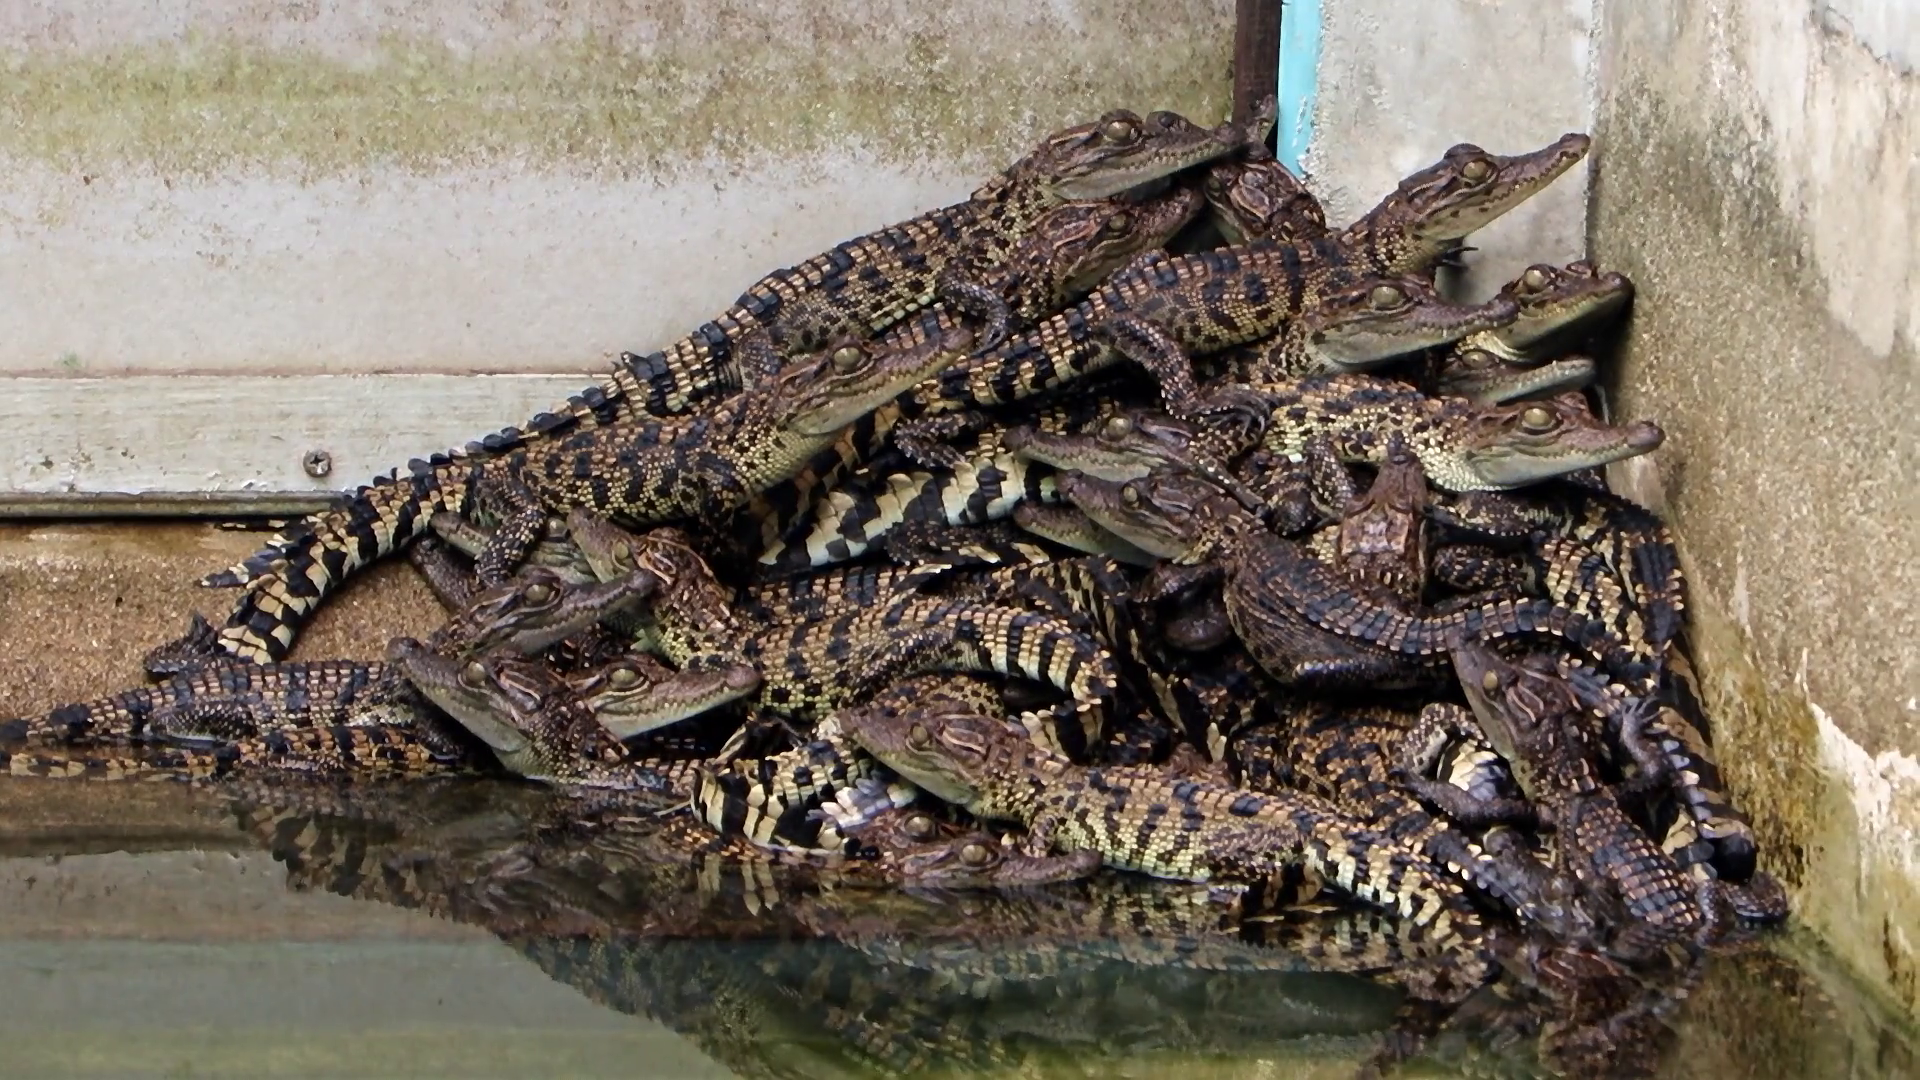 Young crocodiles crawling over each other in a pile in the pool ...